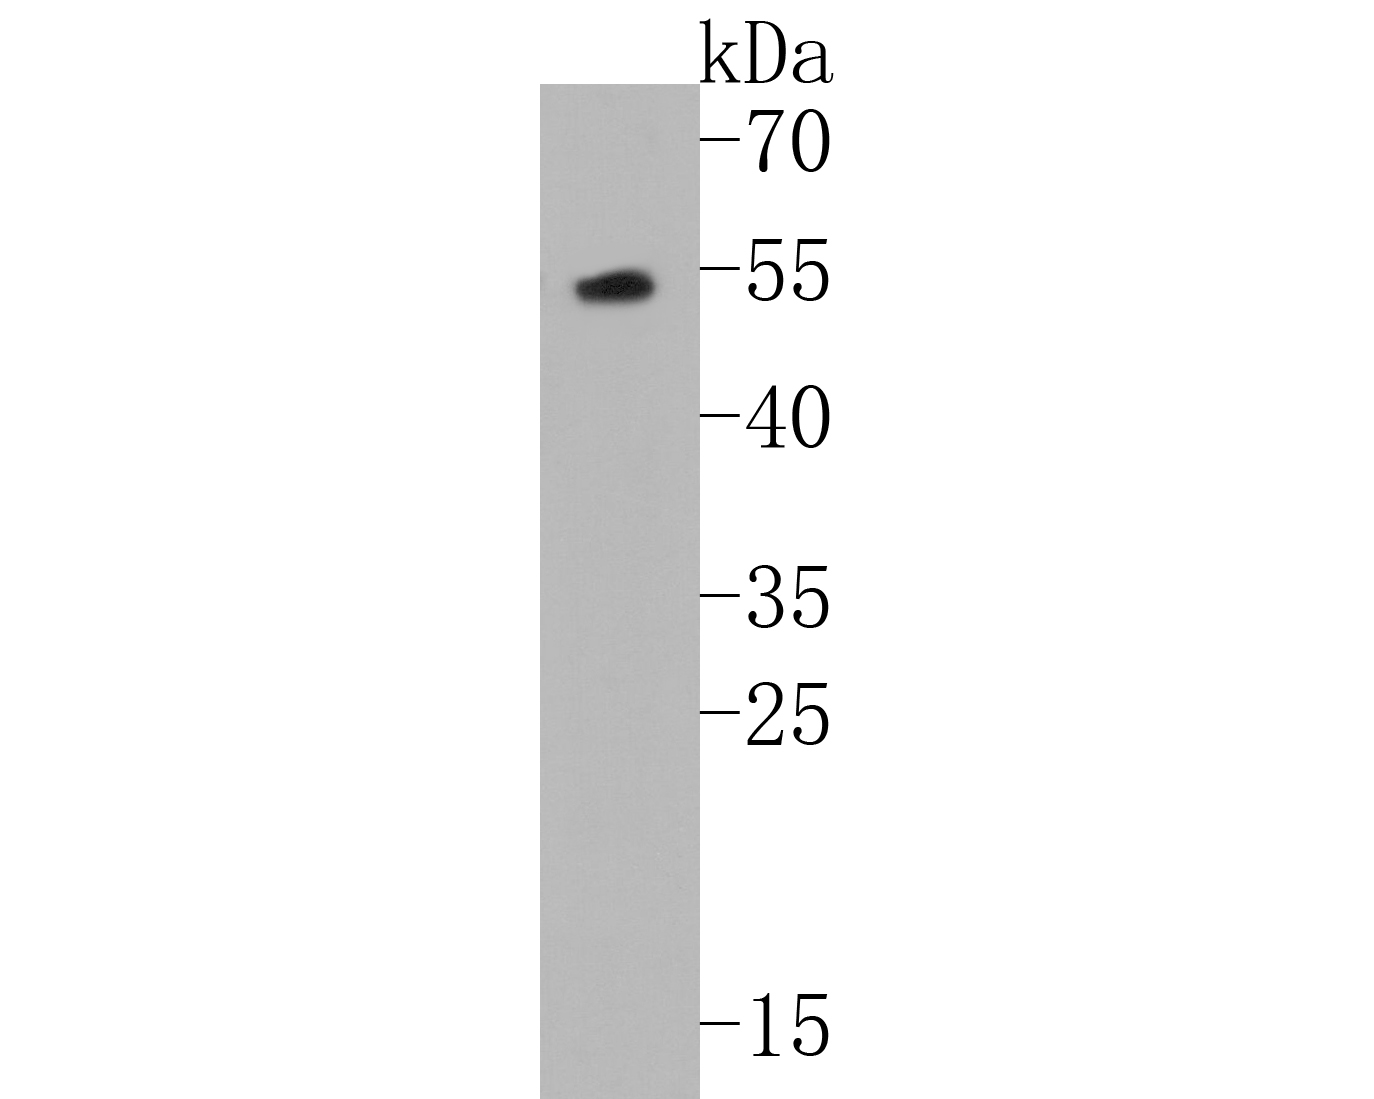 Western blot analysis of AP2M1 on PC-3M cell lysates. Proteins were transferred to a PVDF membrane and blocked with 5% BSA in PBS for 1 hour at room temperature. The primary antibody (ET1612-33, 1/500) was used in 5% BSA at room temperature for 2 hours. Goat Anti-Rabbit IgG - HRP Secondary Antibody (HA1001) at 1:5,000 dilution was used for 1 hour at room temperature.